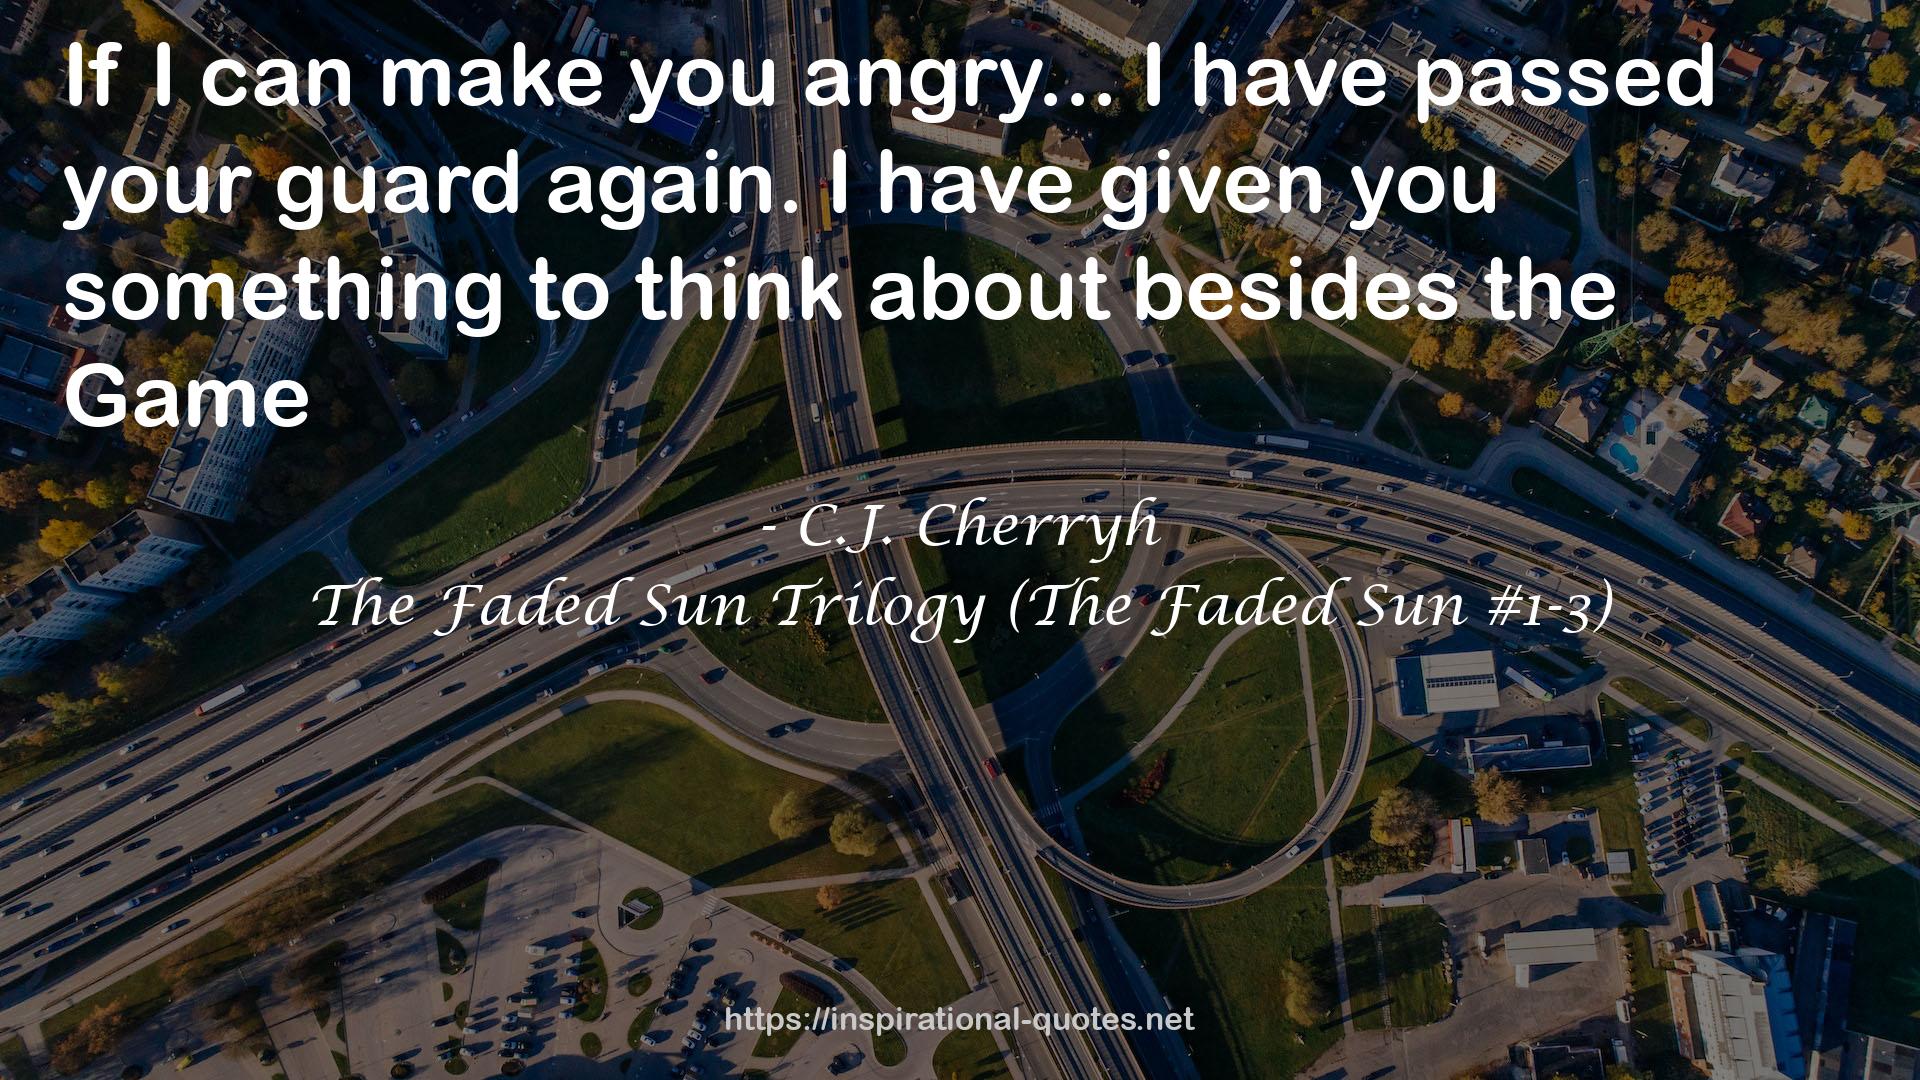 The Faded Sun Trilogy (The Faded Sun #1-3) QUOTES